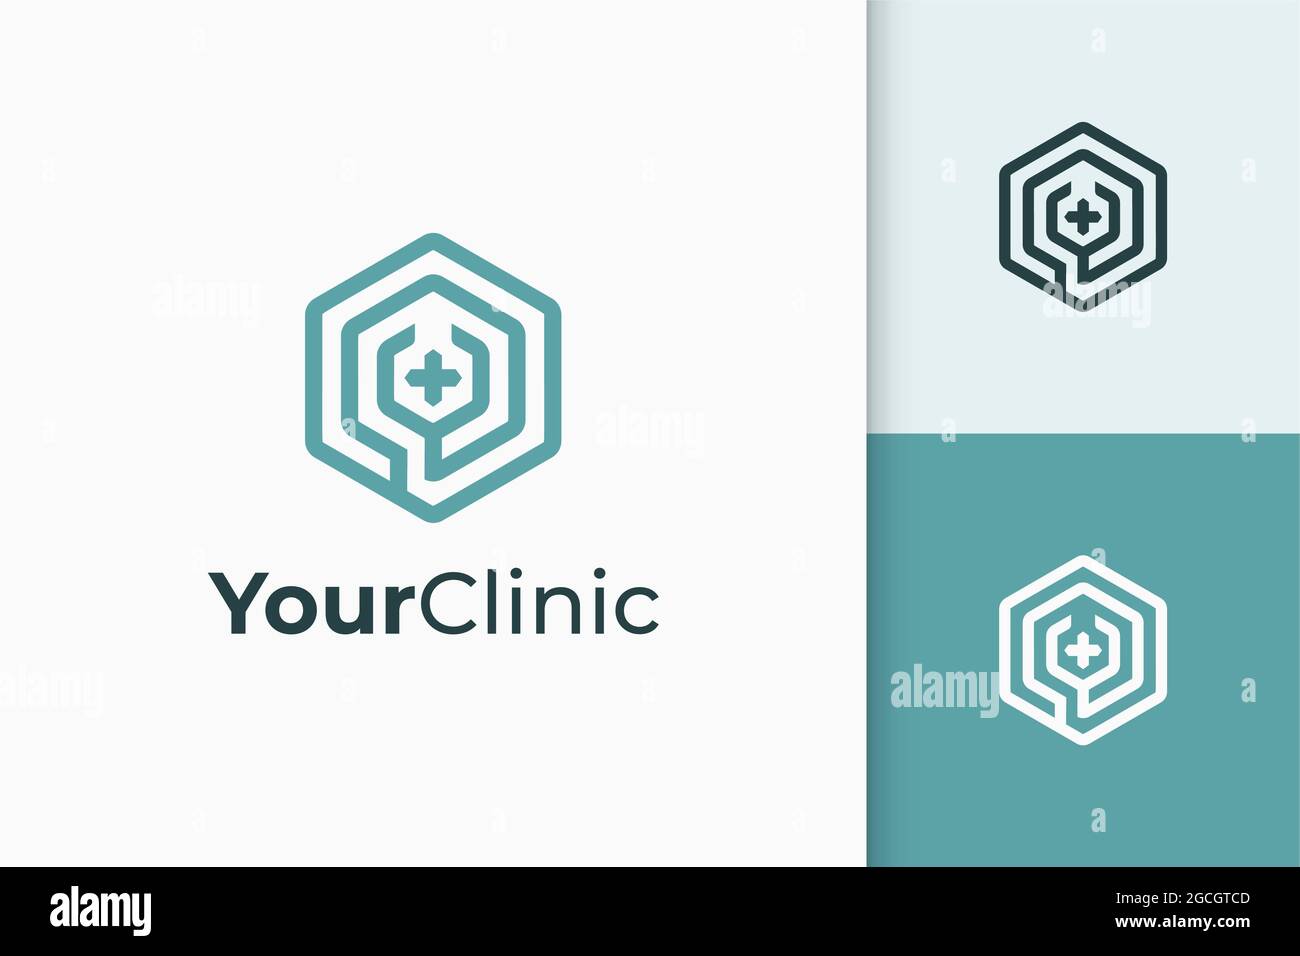 Clinic or apothecary logo in stethoscope shape Stock Vector